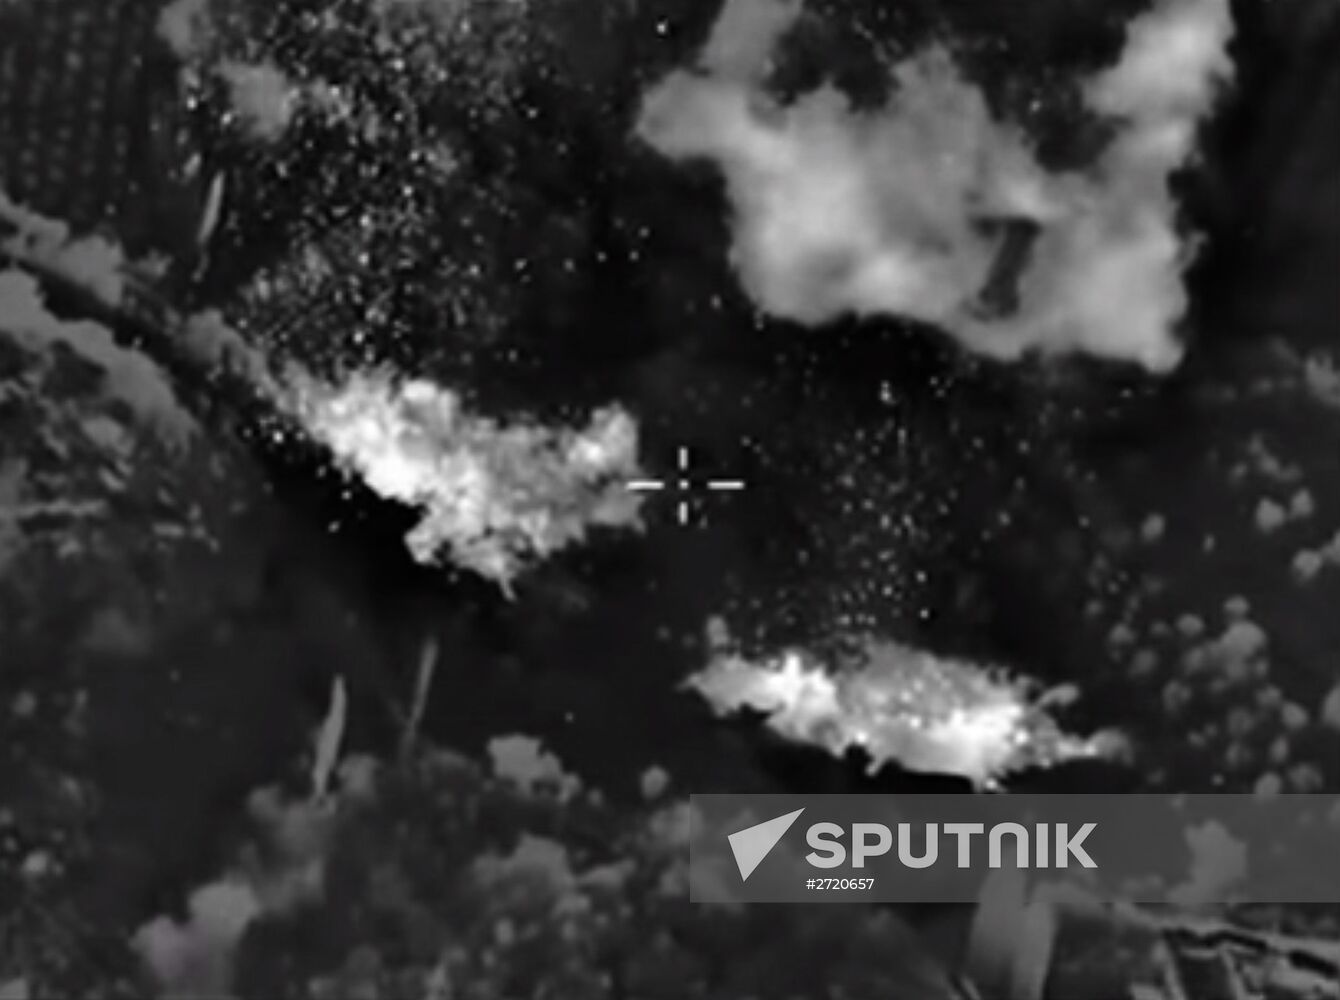 Russian air force strikes in Syria